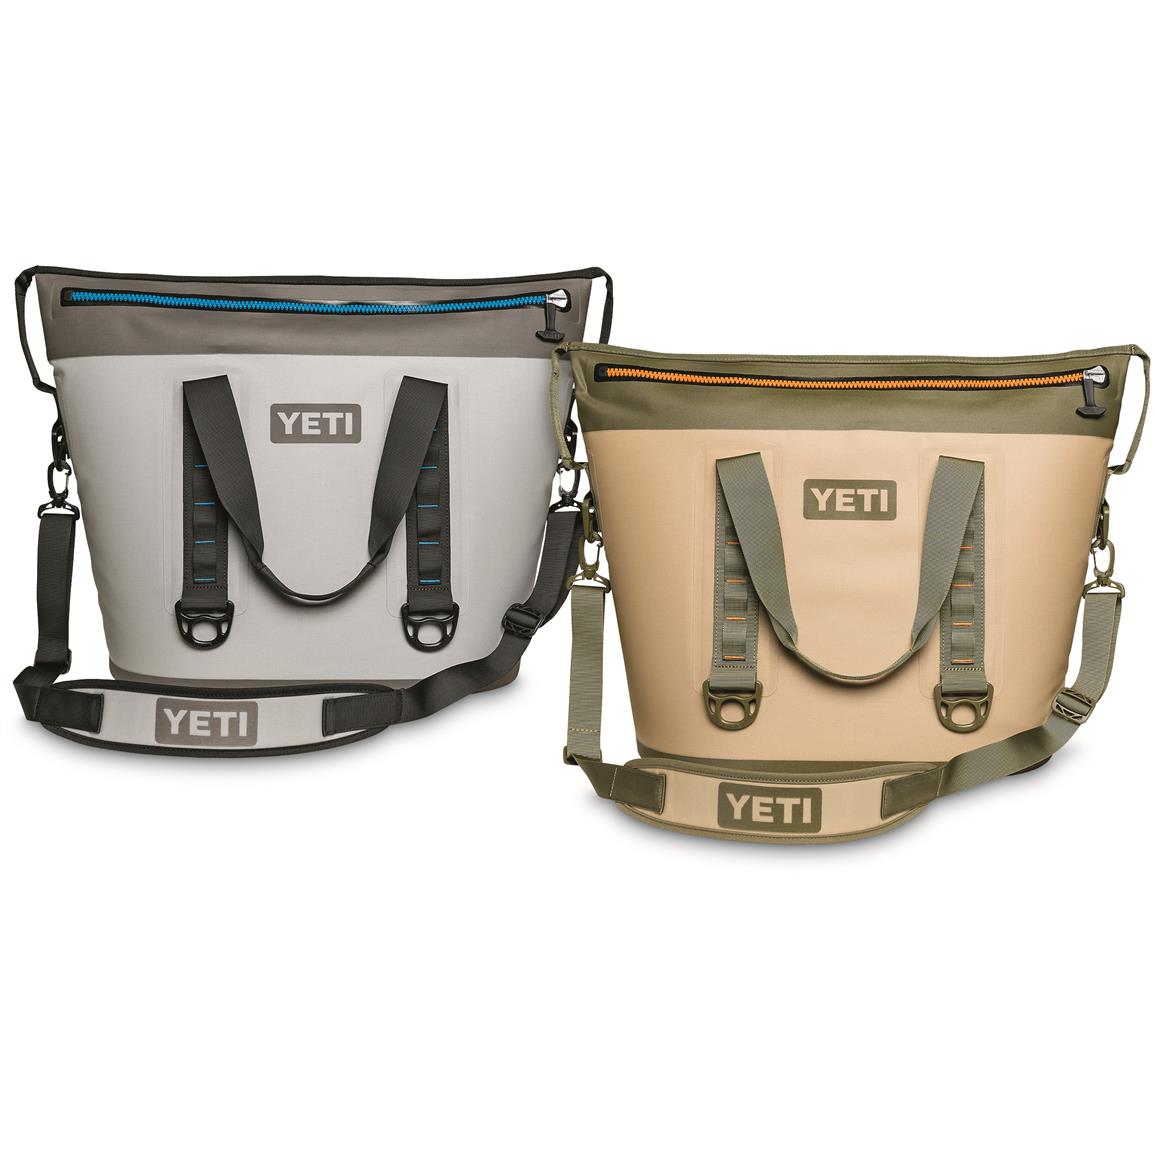 Yeti Hopper Two 40 699006 Camping Coolers At Sportsman S Guide